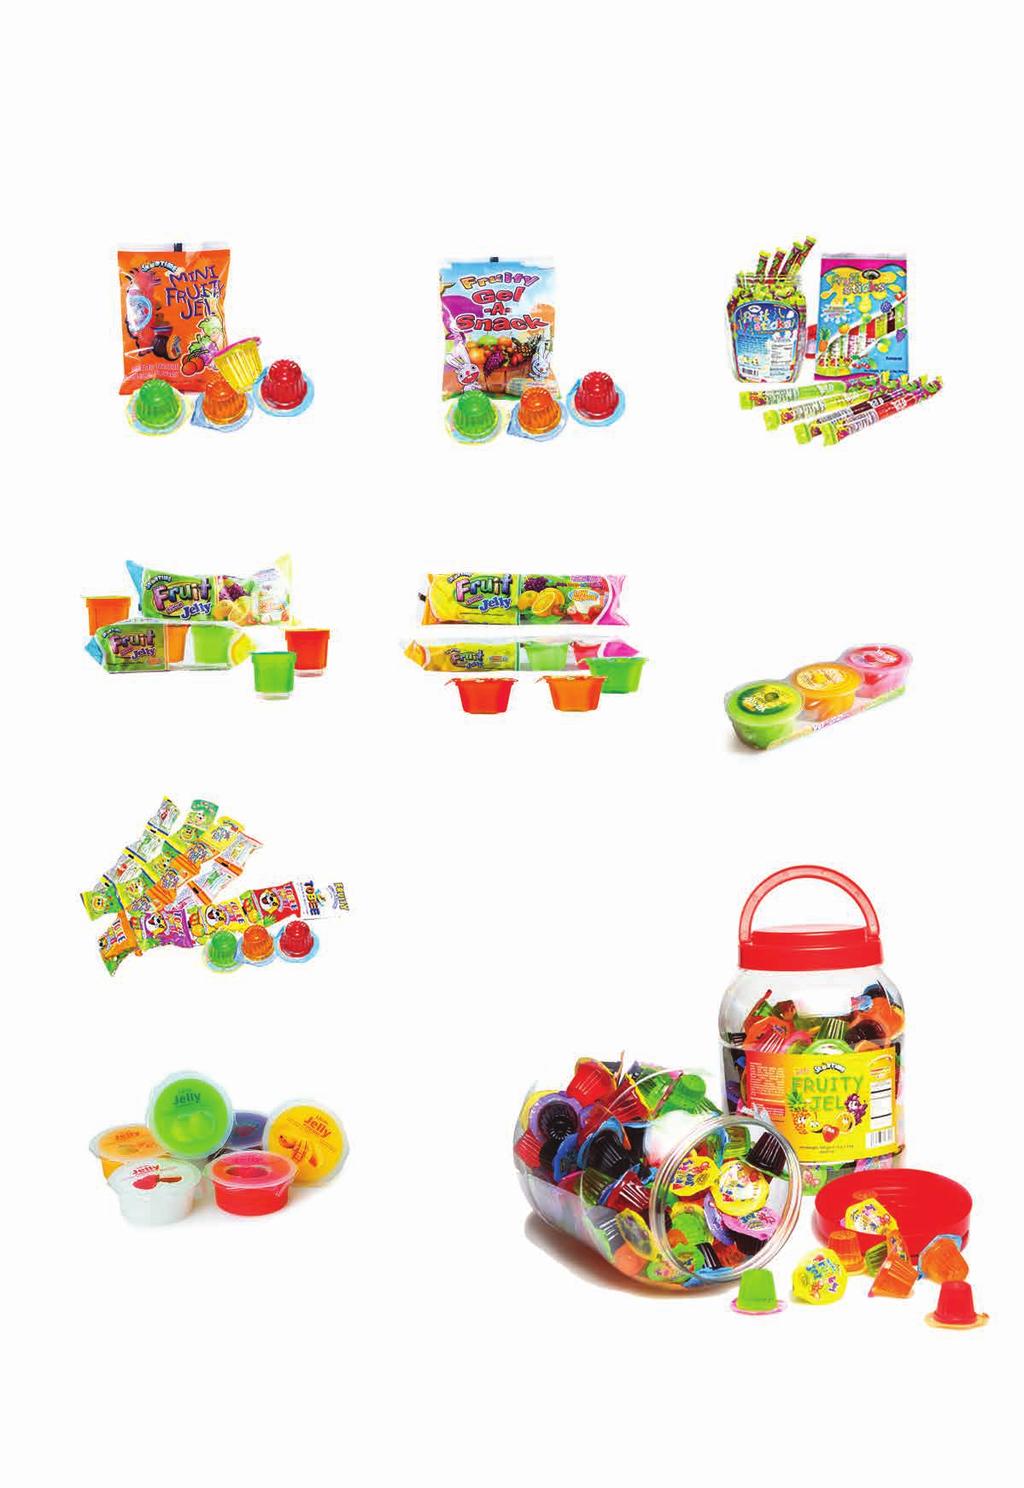 Jellies Mini Fruity Jelly Packing: 24 packs x 10 pcs. x 14 g. Loadability: 1,589 cases/20 footer Gel a Snack Packing: 24 packs x 10 pcs. x 14 g. Loadability: 1,589 cases/20 footer Fruit Sticks Packing: 10 bags x 20 pcs x 20 g.